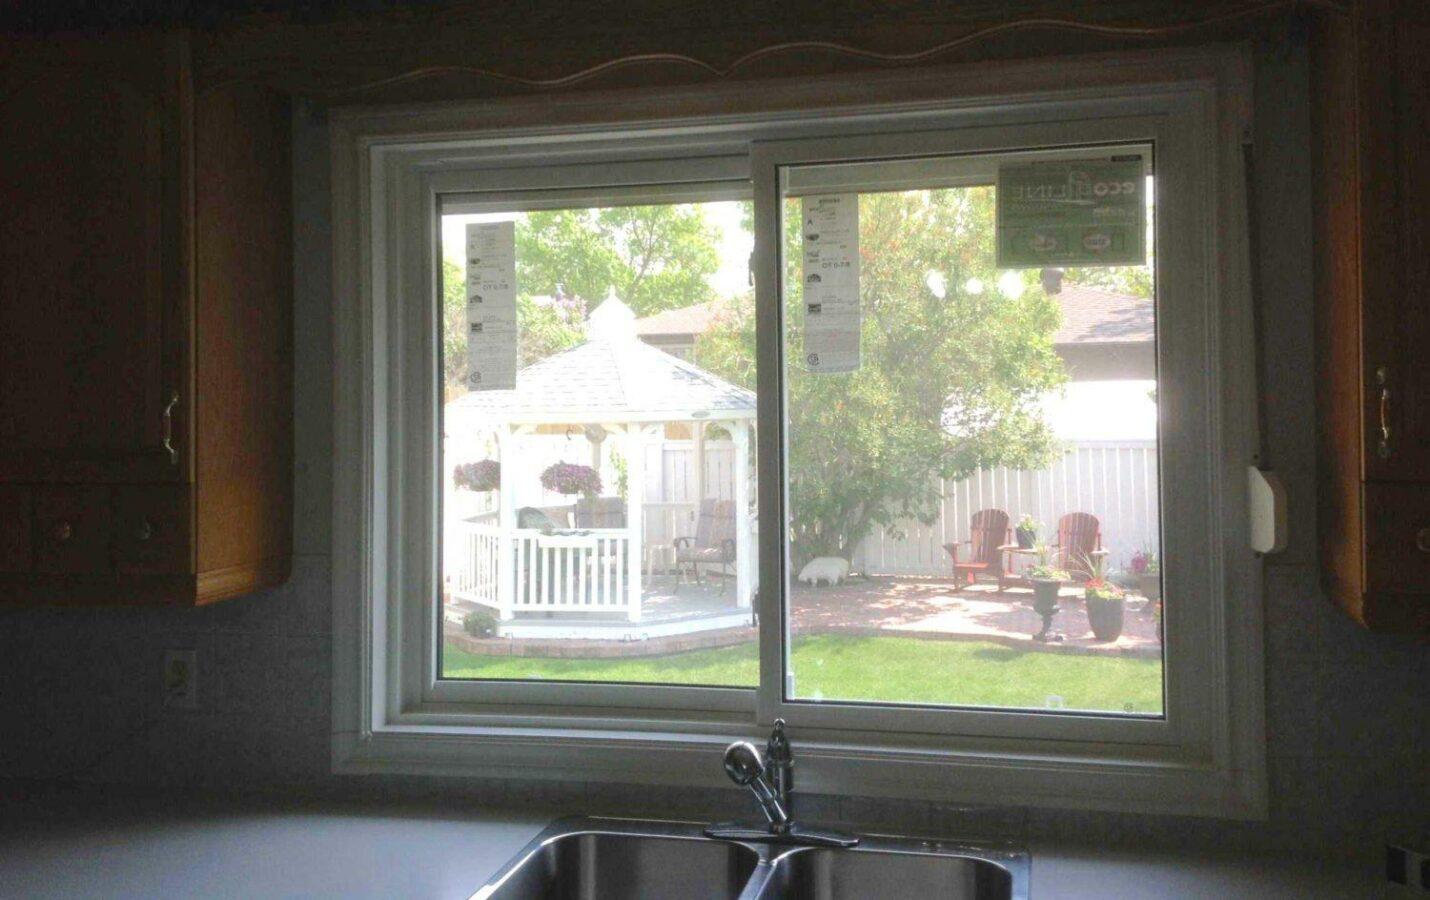 A kitchen slider window blocked by a high faucet